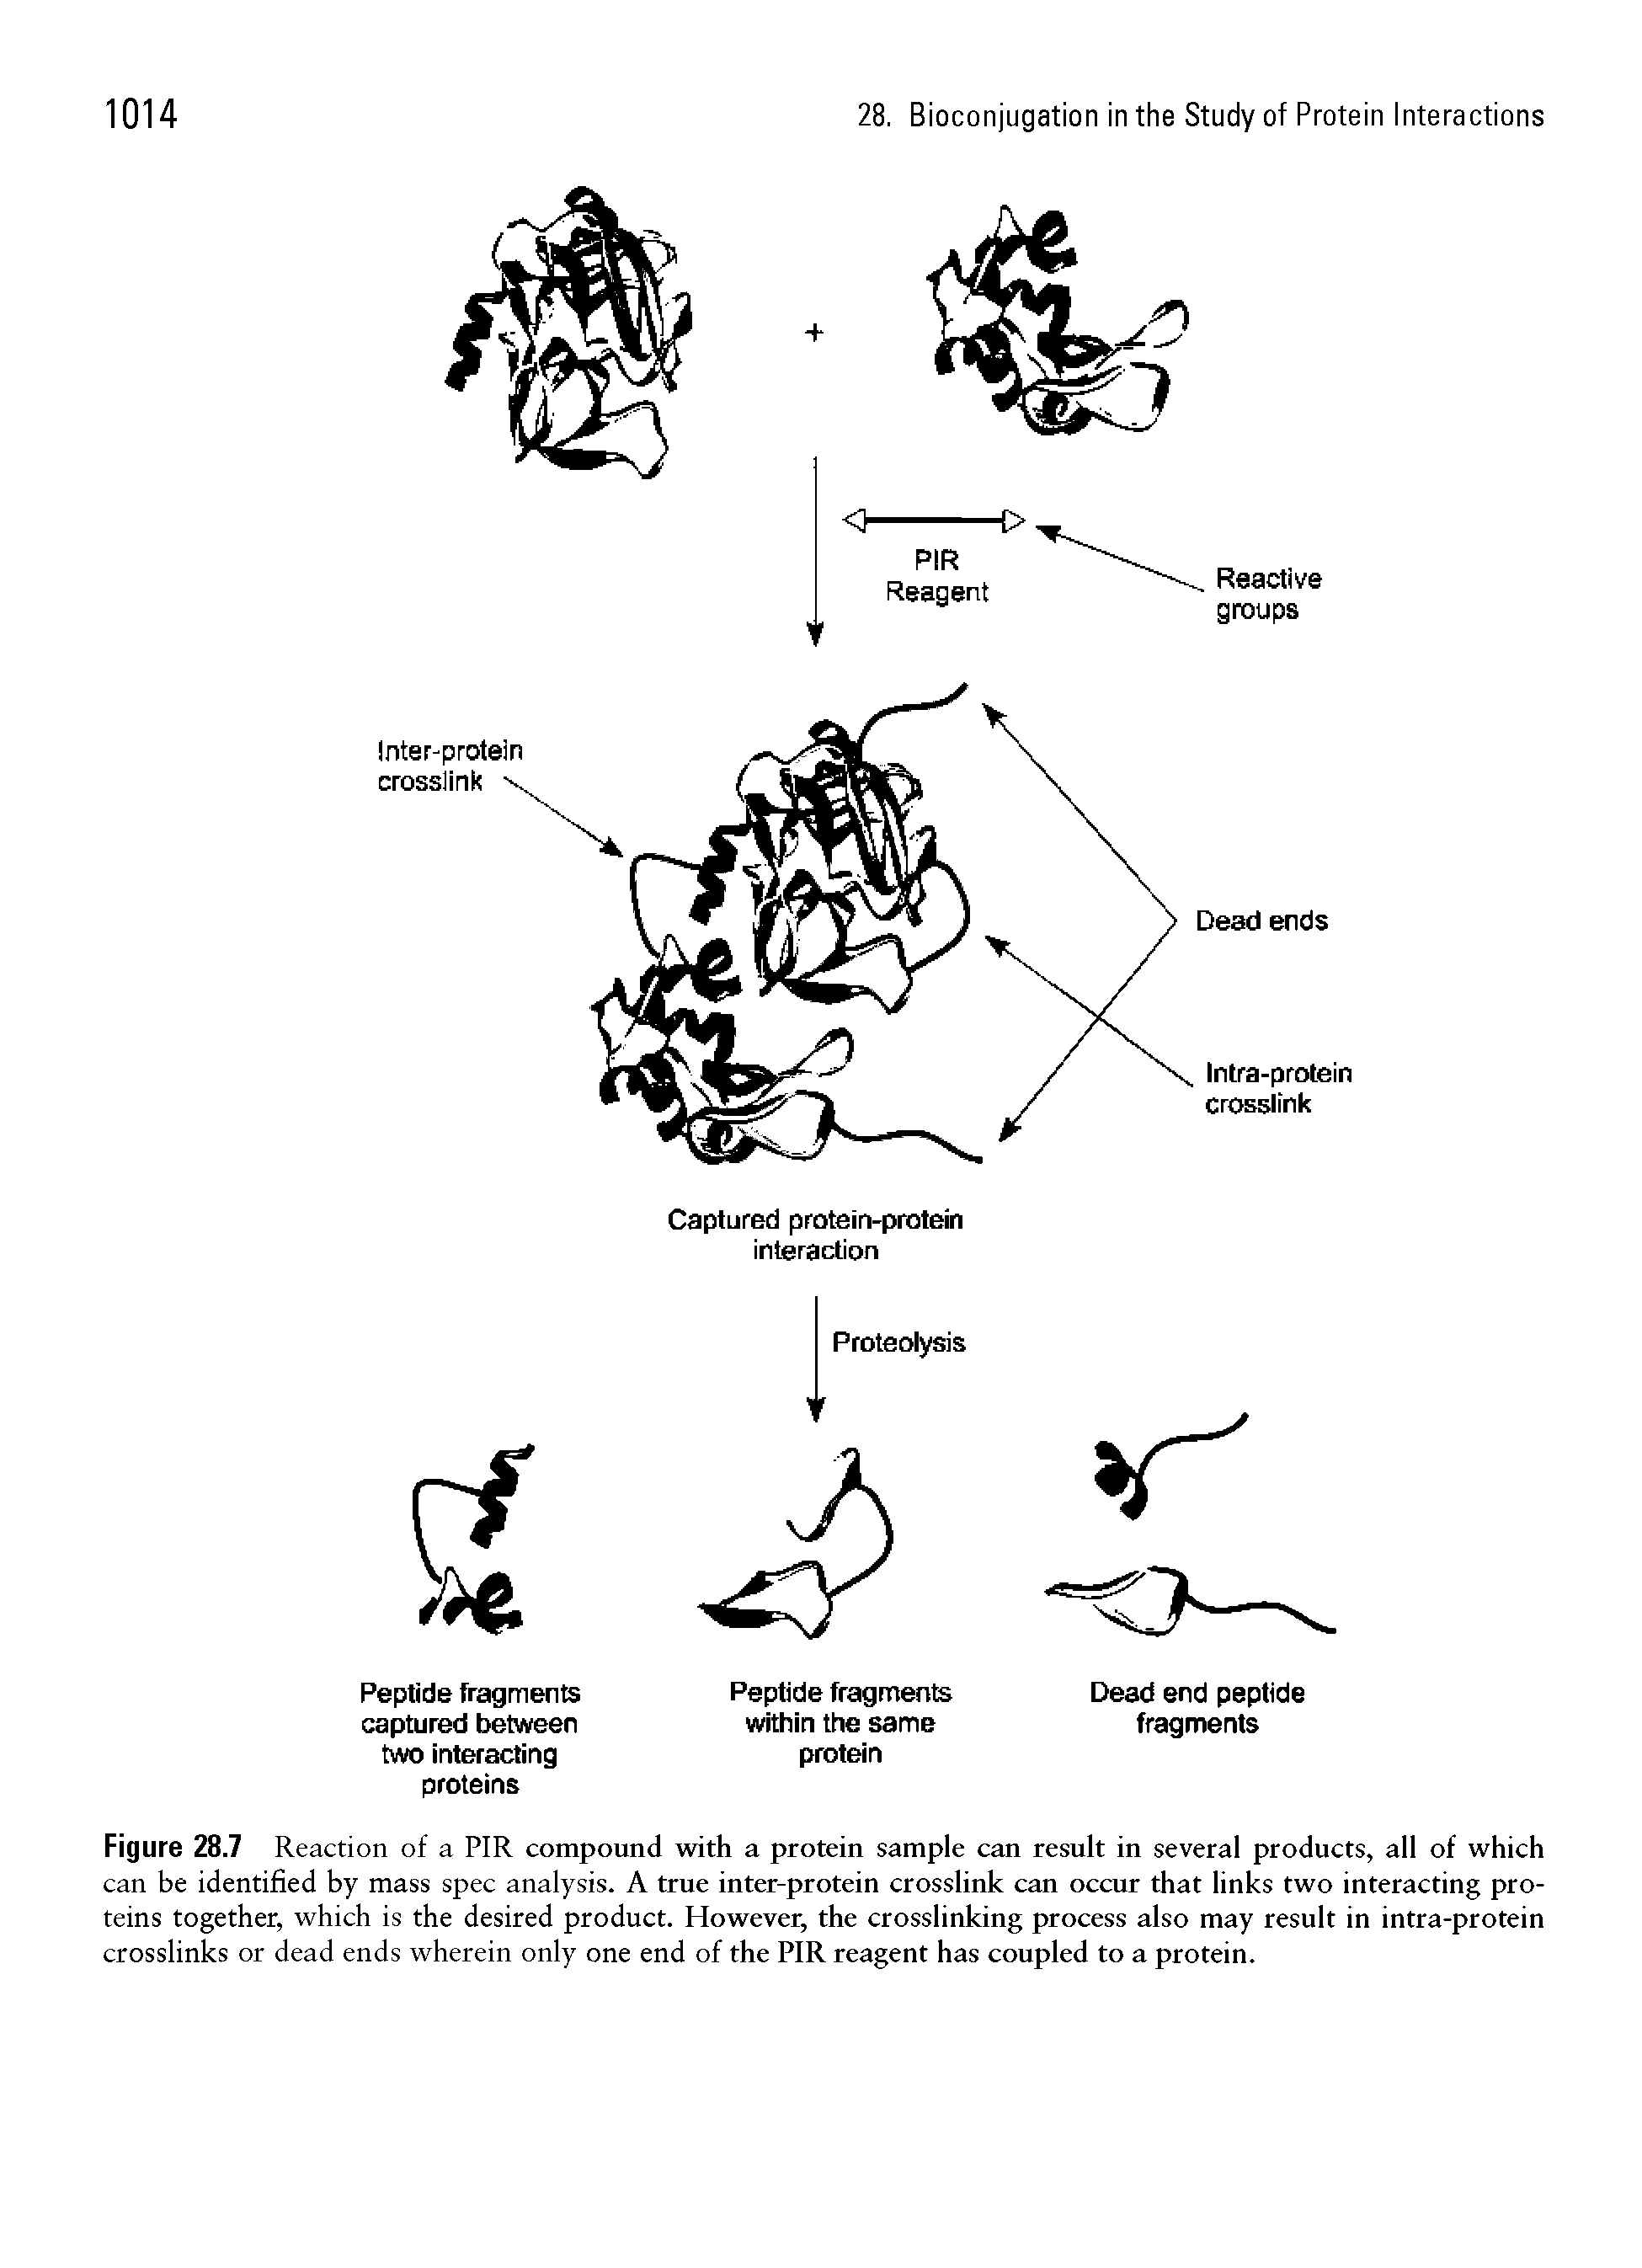 Figure 28.7 Reaction of a PIR compound with a protein sample can result in several products, all of which can be identified by mass spec analysis. A true inter-protein crosslink can occur that links two interacting proteins together, which is the desired product. However, the crosslinking process also may result in intra-protein crosslinks or dead ends wherein only one end of the PIR reagent has coupled to a protein.